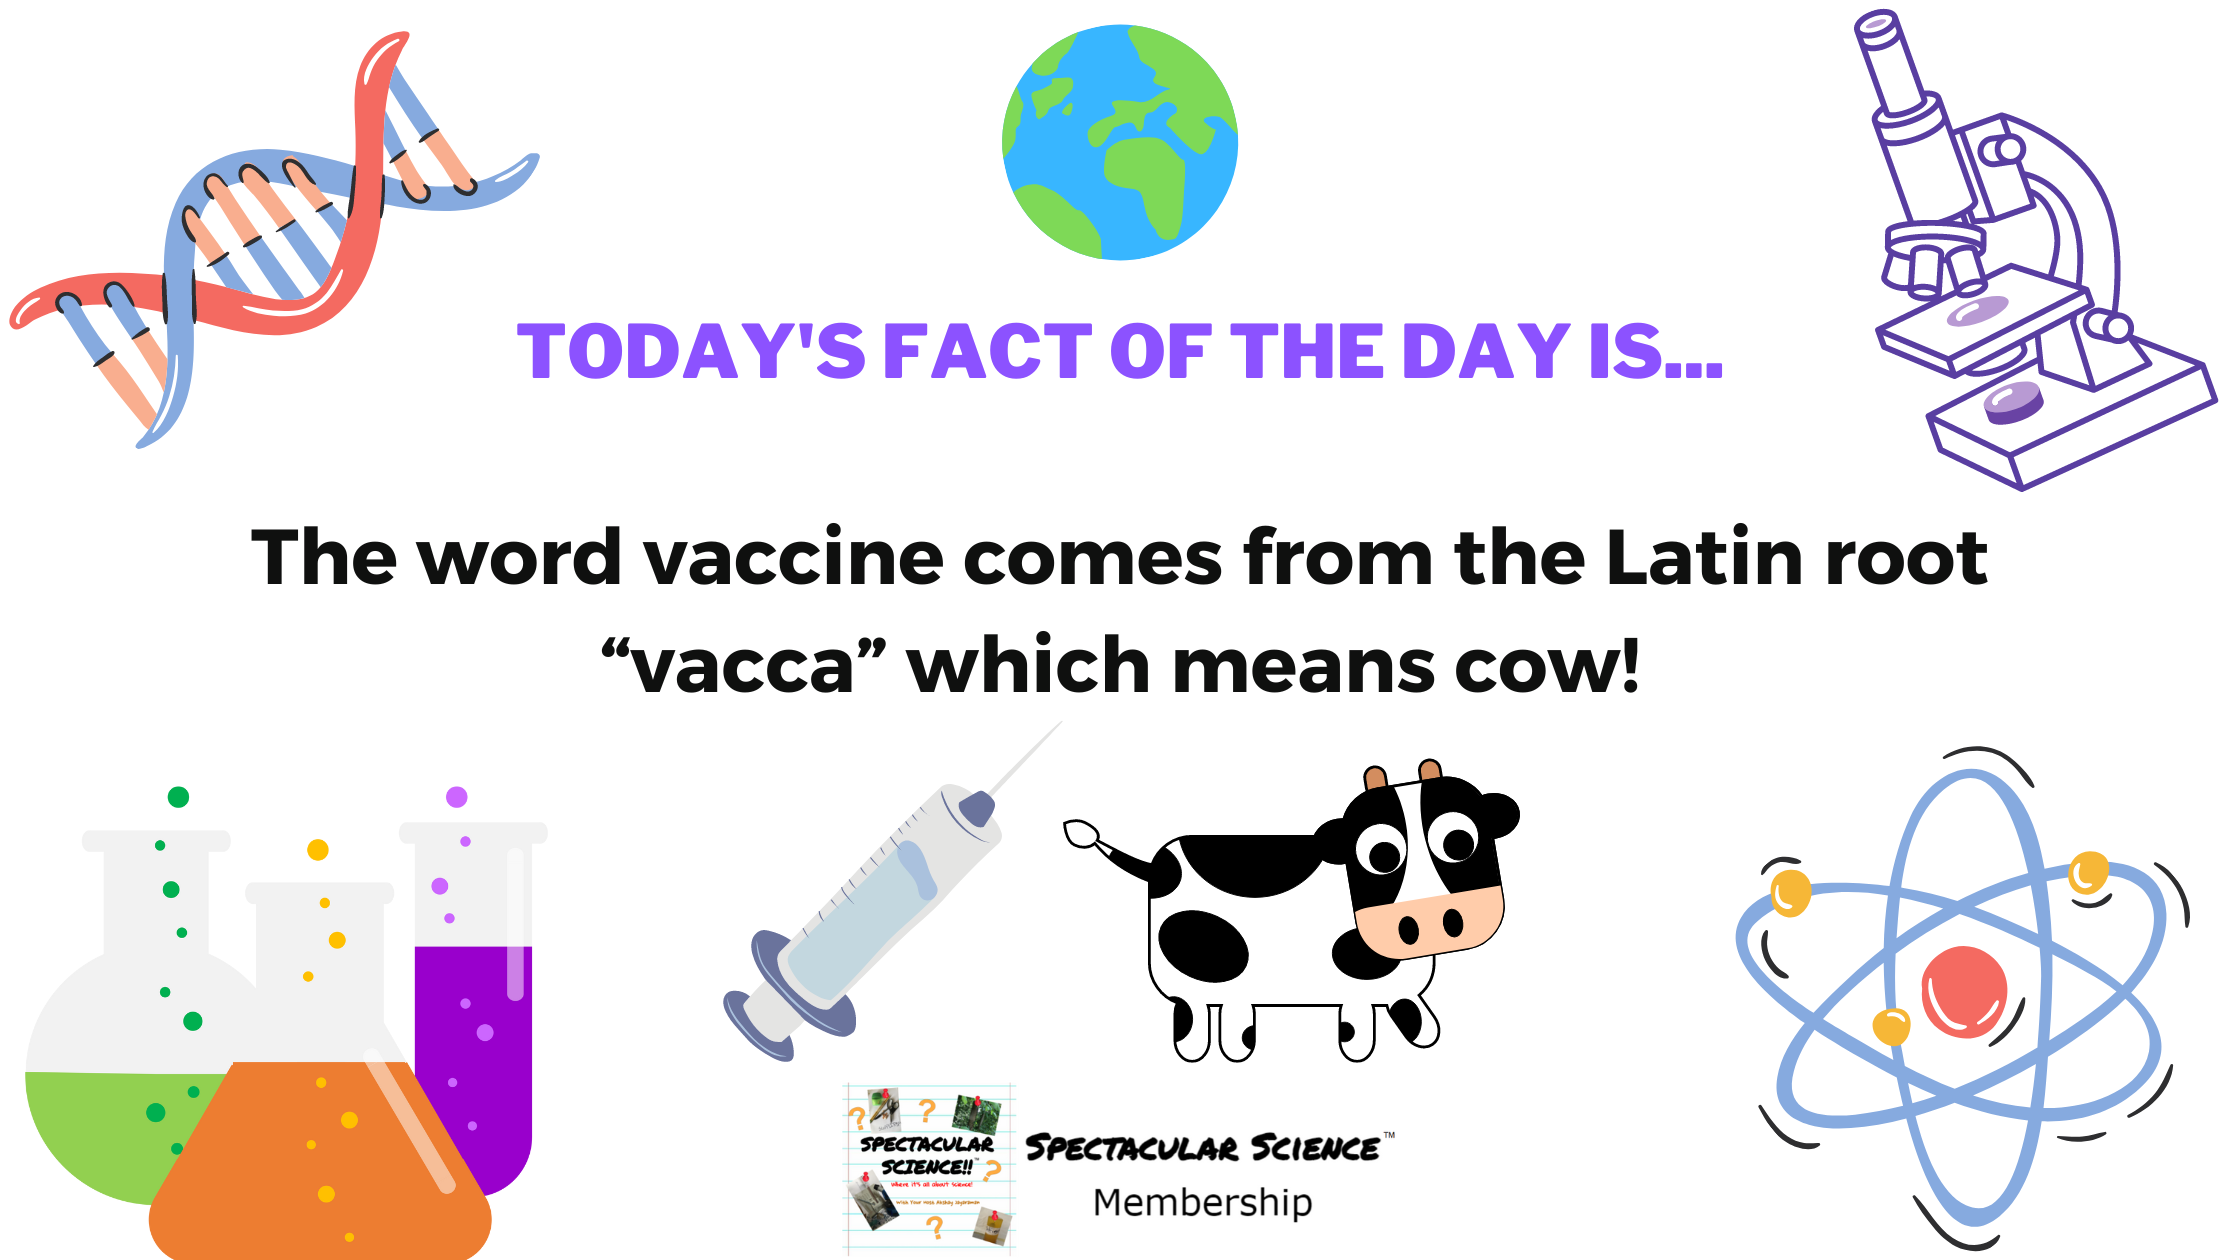 Fact of the Day Image August 31st